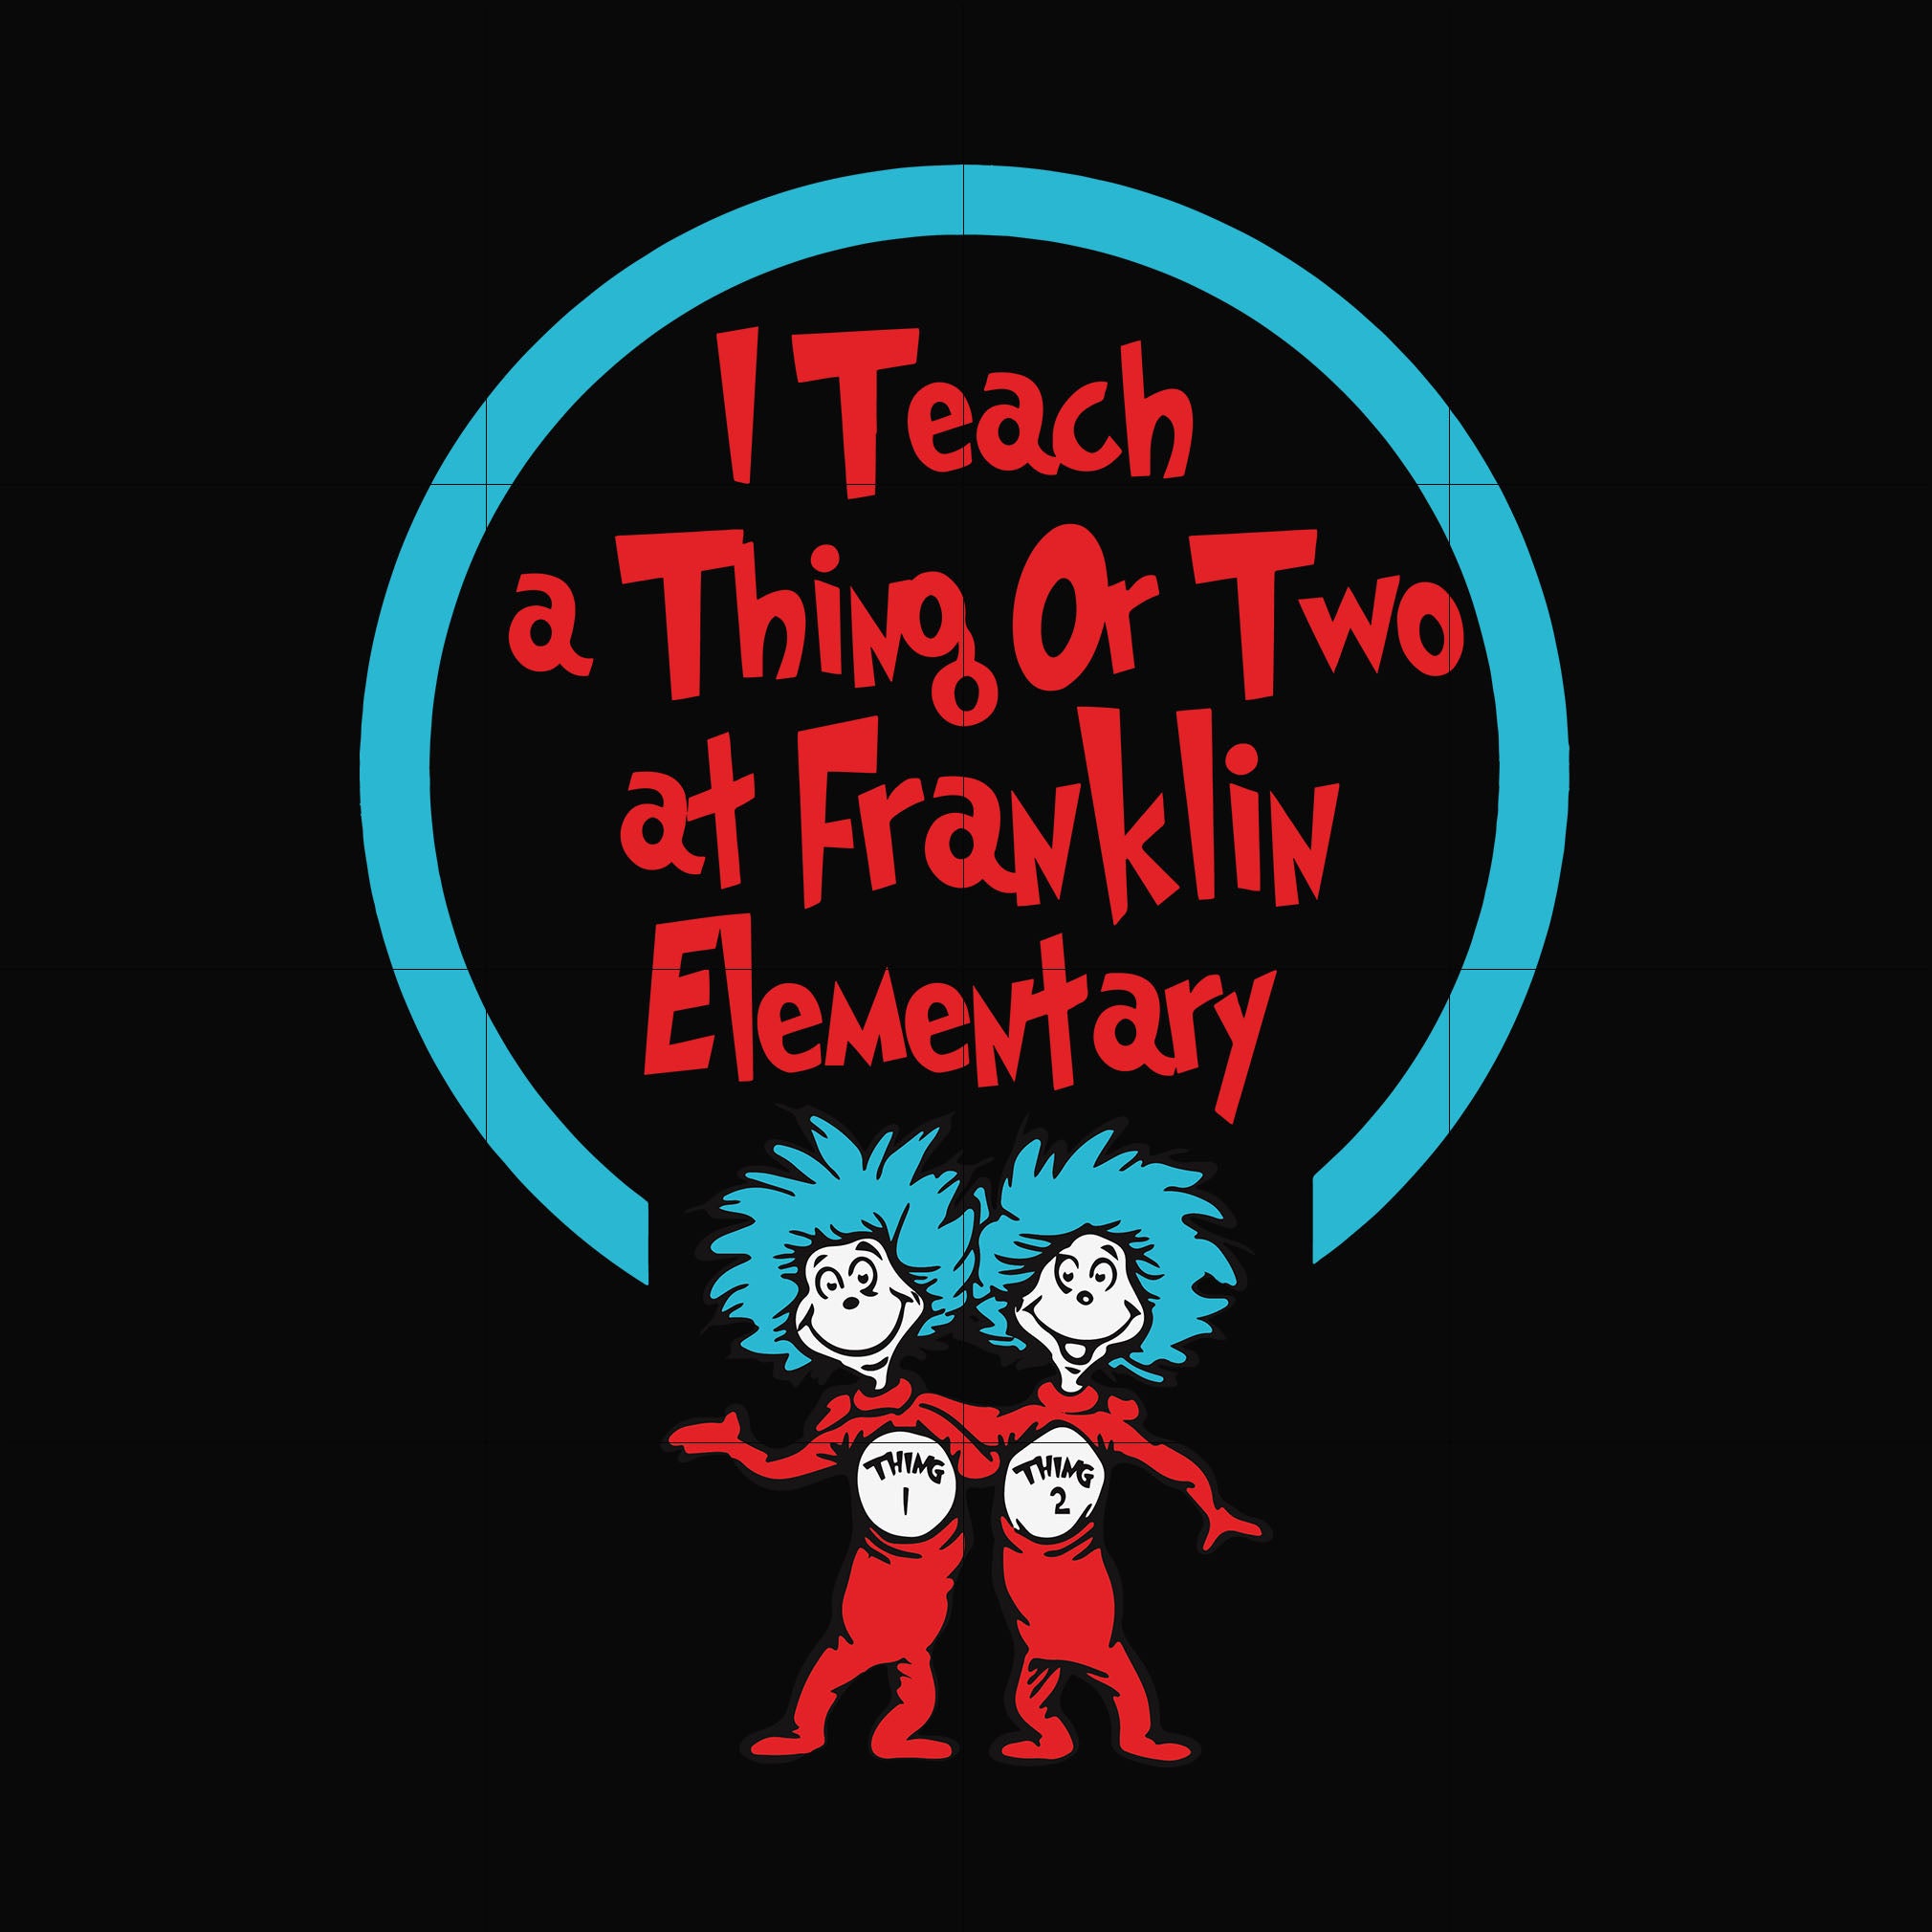 I teach a thing or two at Franklin elementary svg, png, dxf, eps file